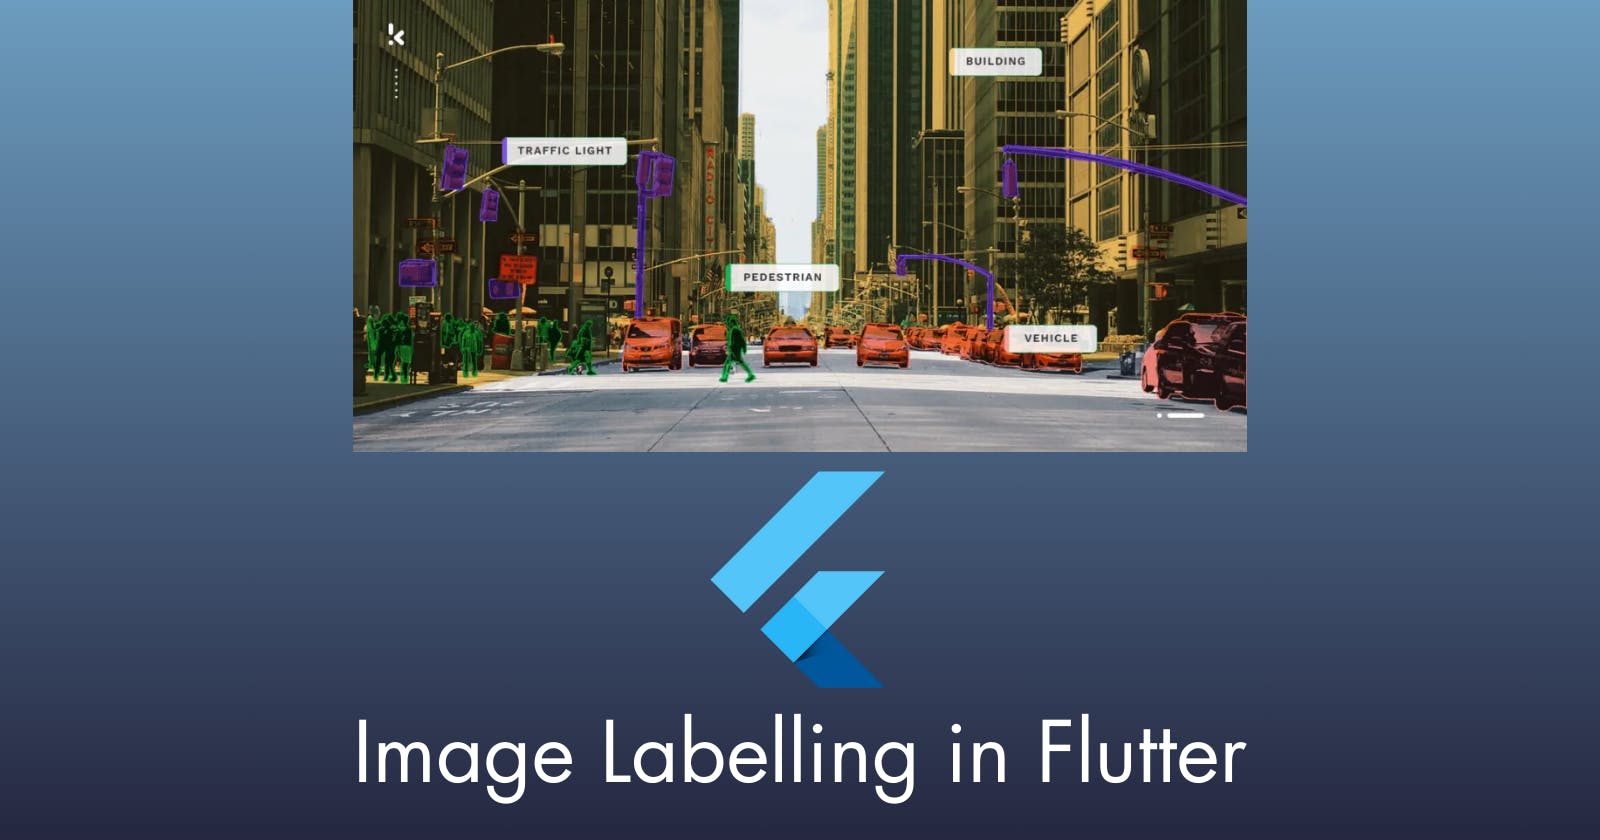 Performing Image Labelling in Flutter